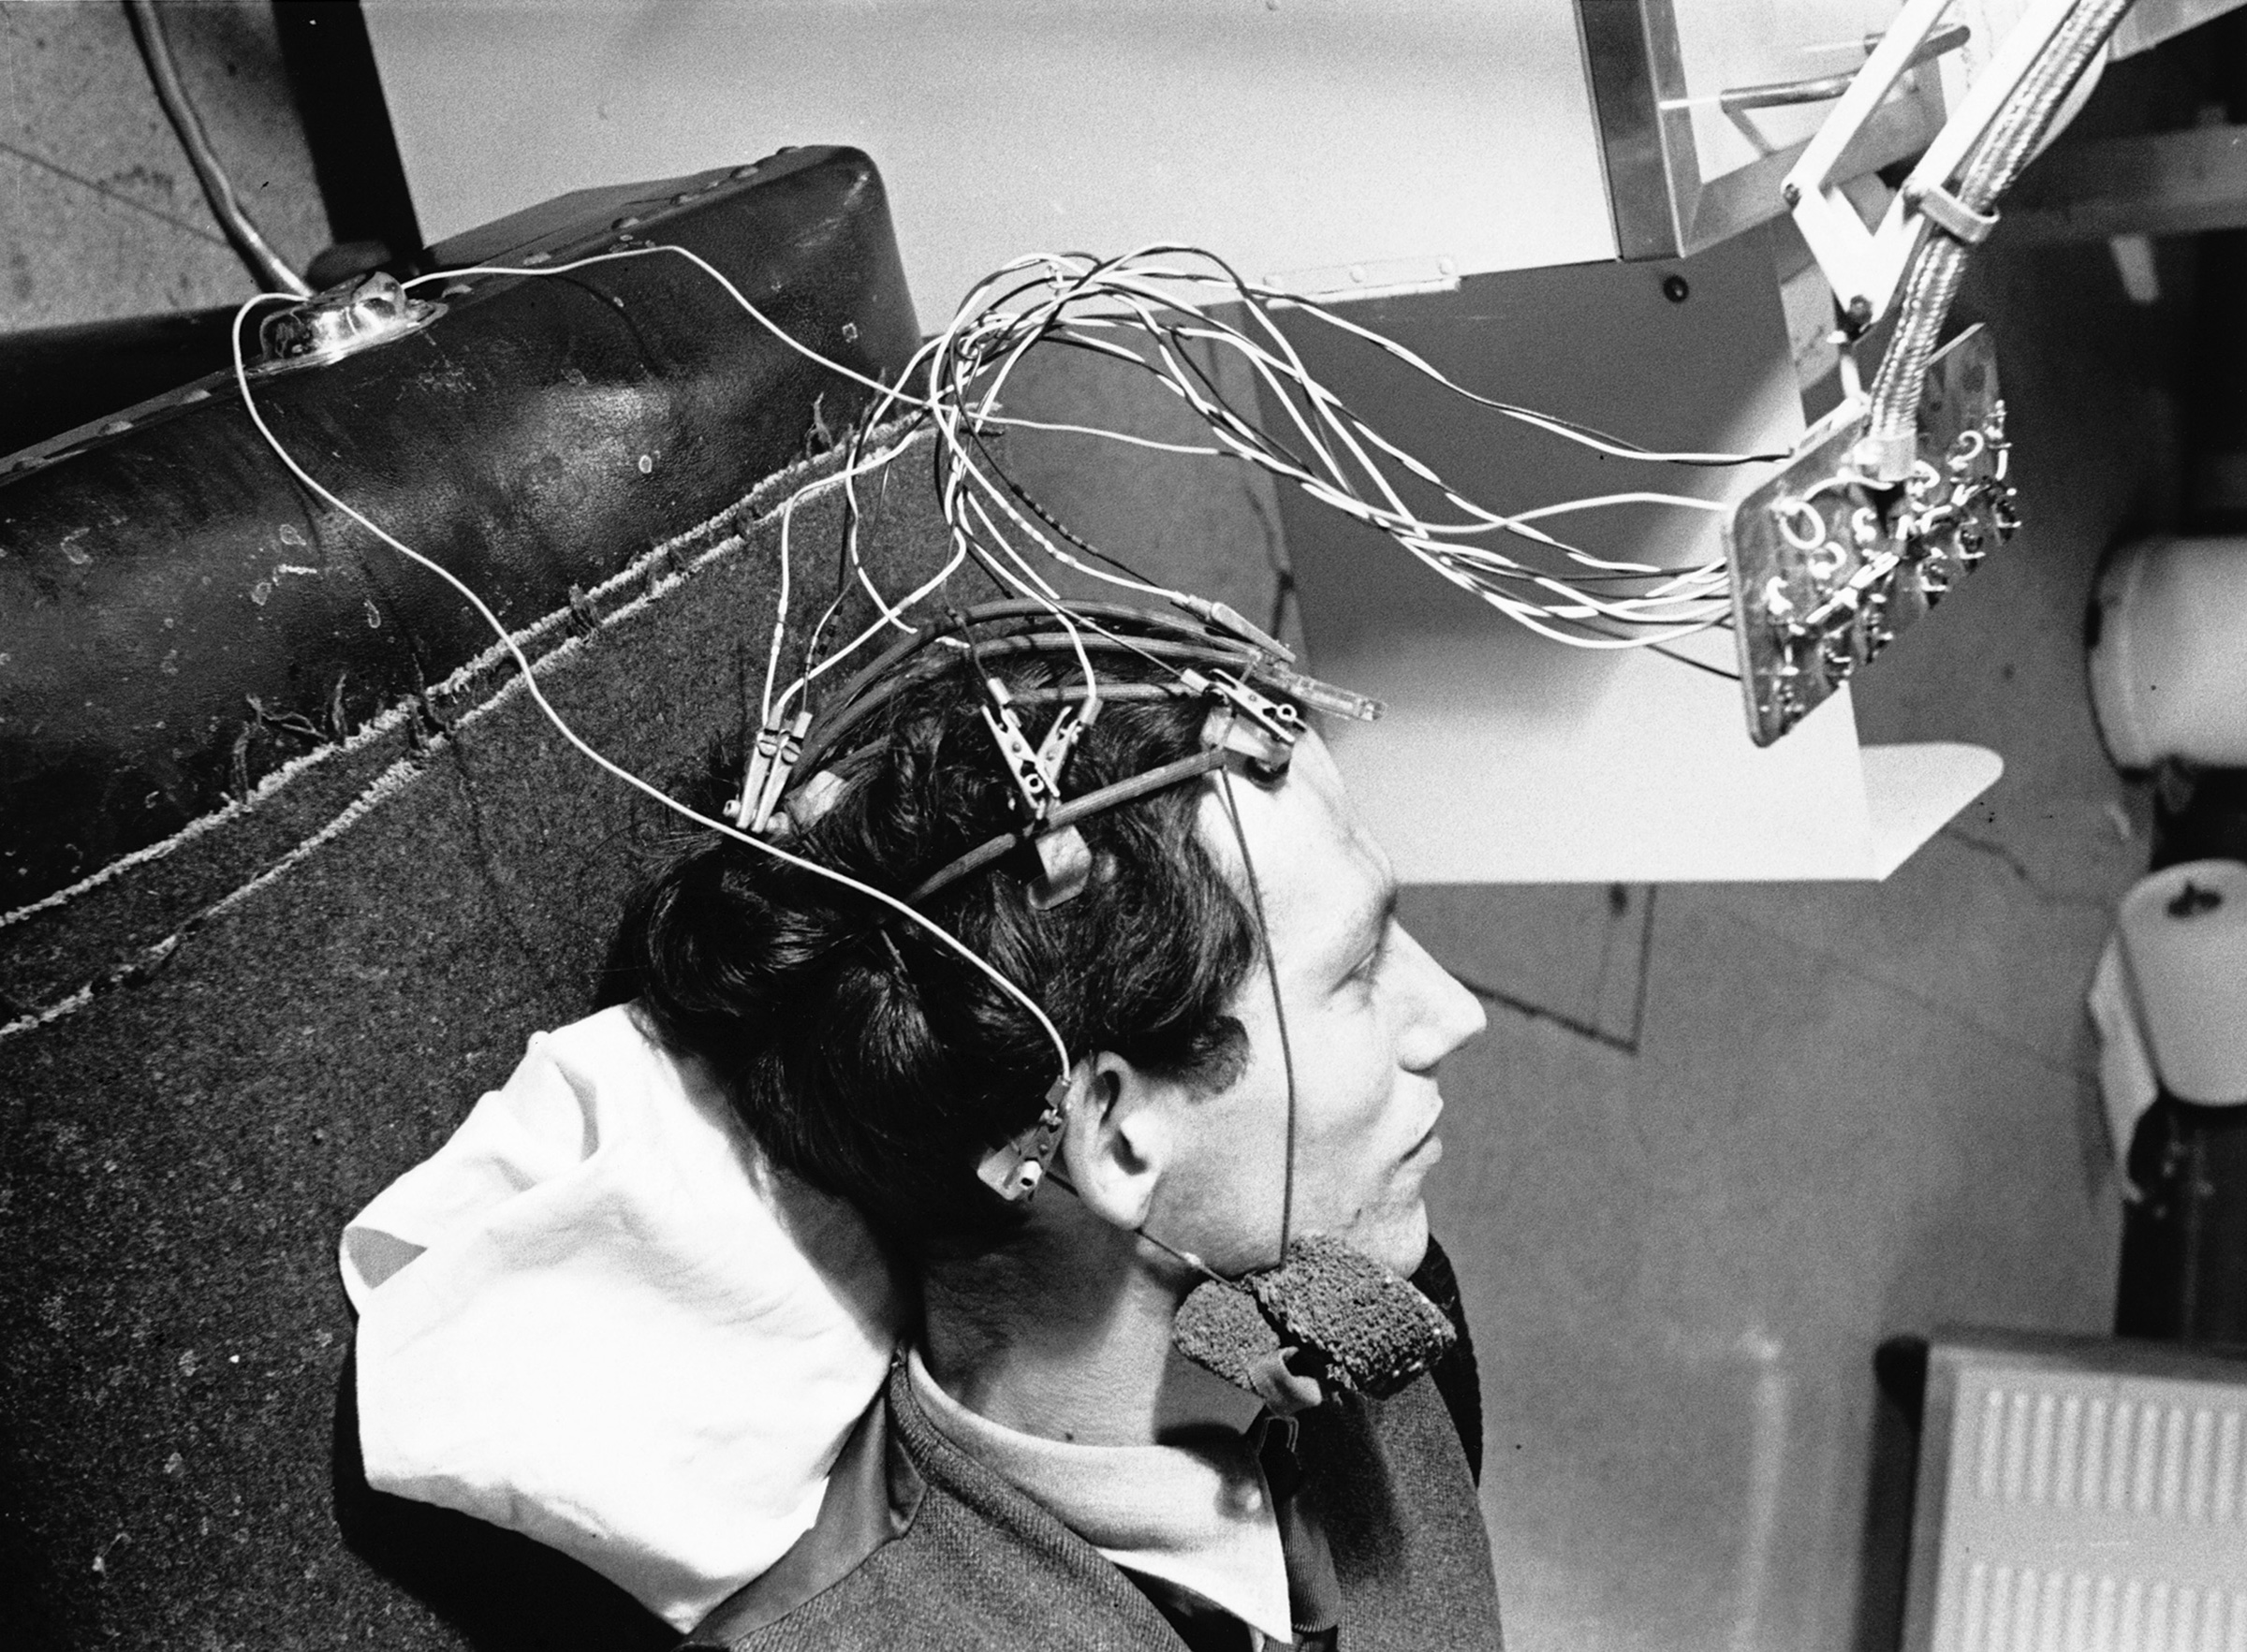 A machine measures the electrical brain activity of a man with epilepsy in 1950 (Corbis/Getty Images)